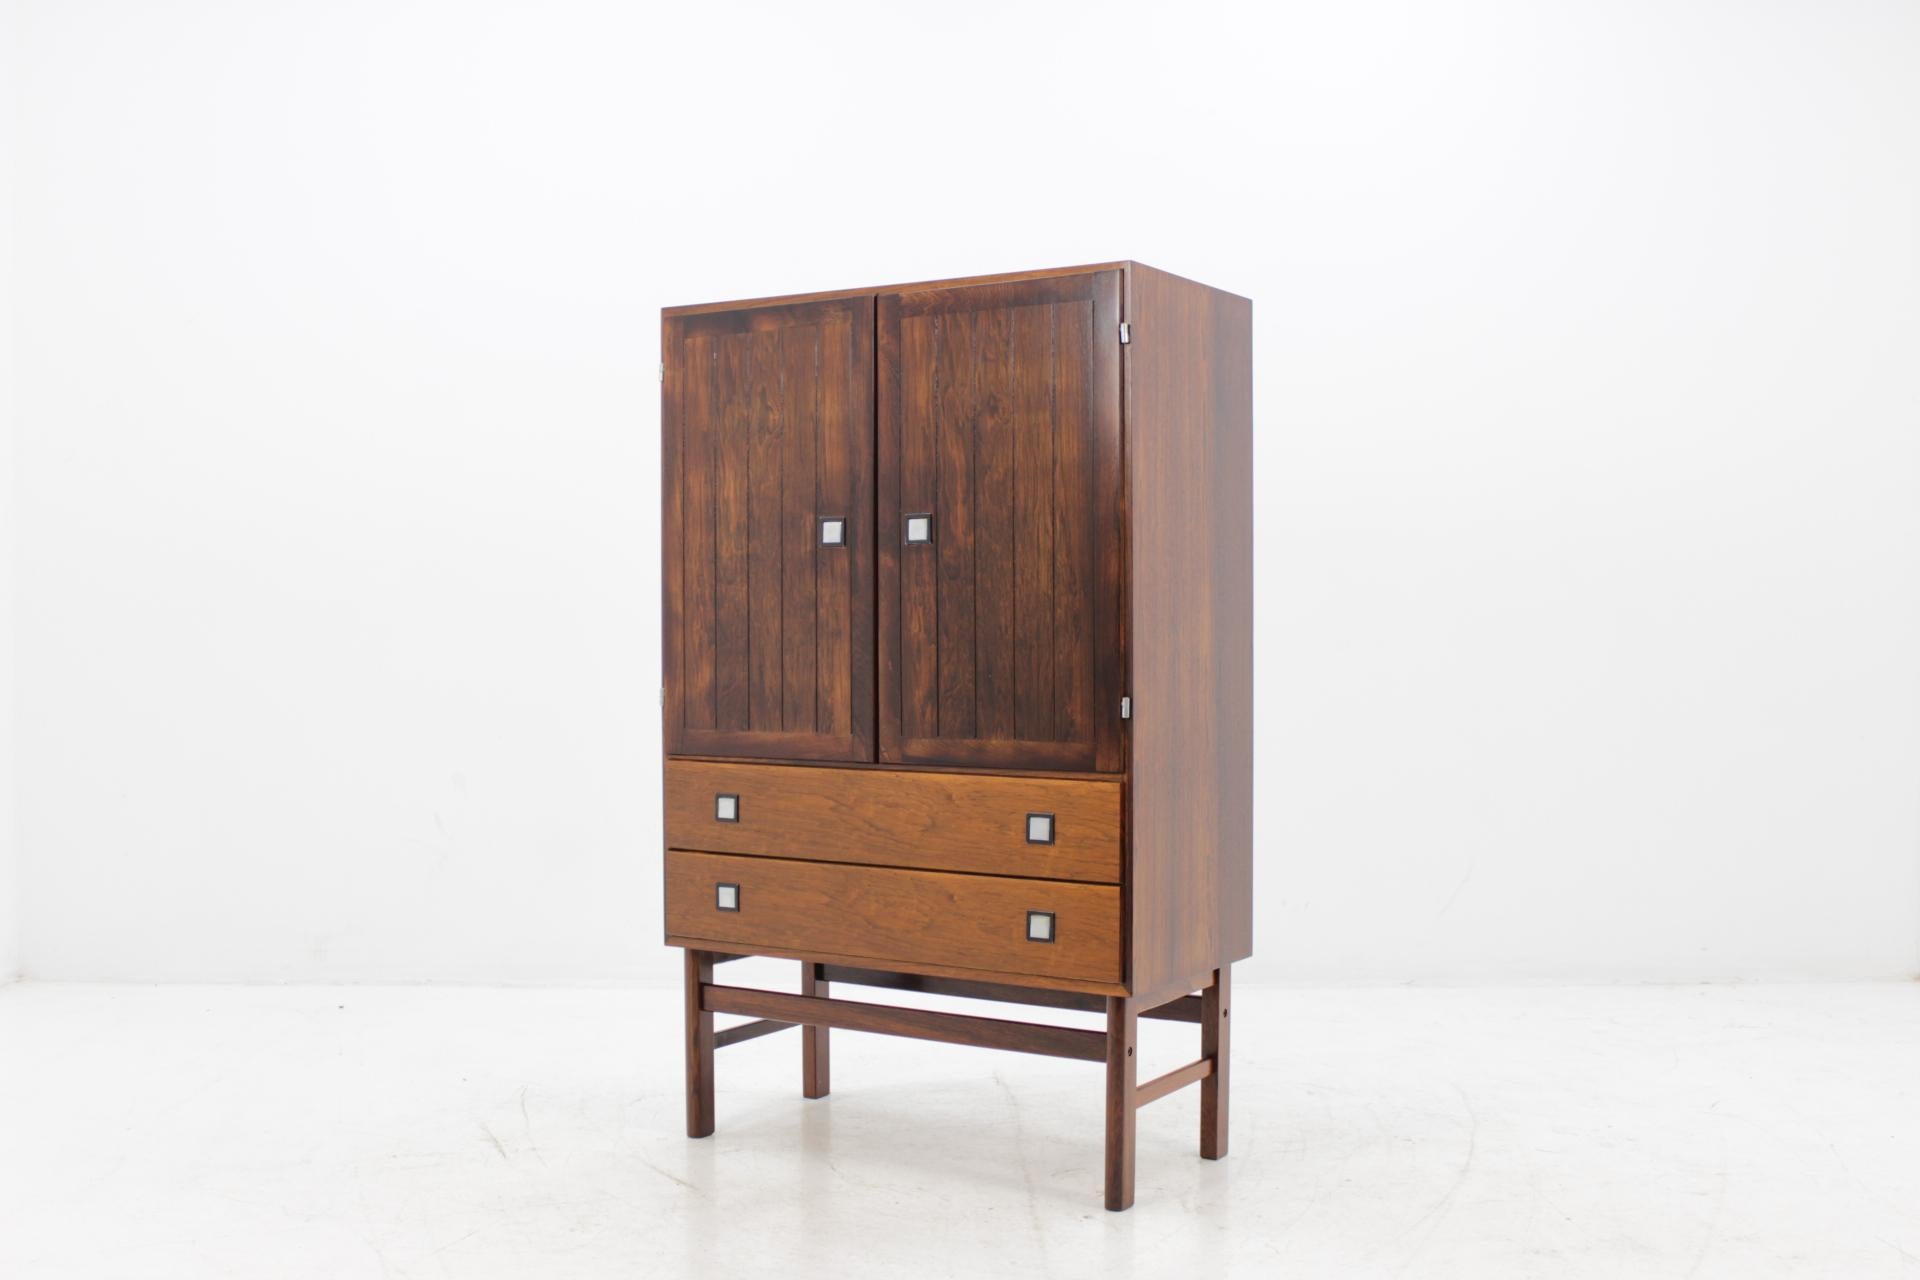 This cabinet features two doors compartment with inner shelves and two drawers. The item was carefully restored.